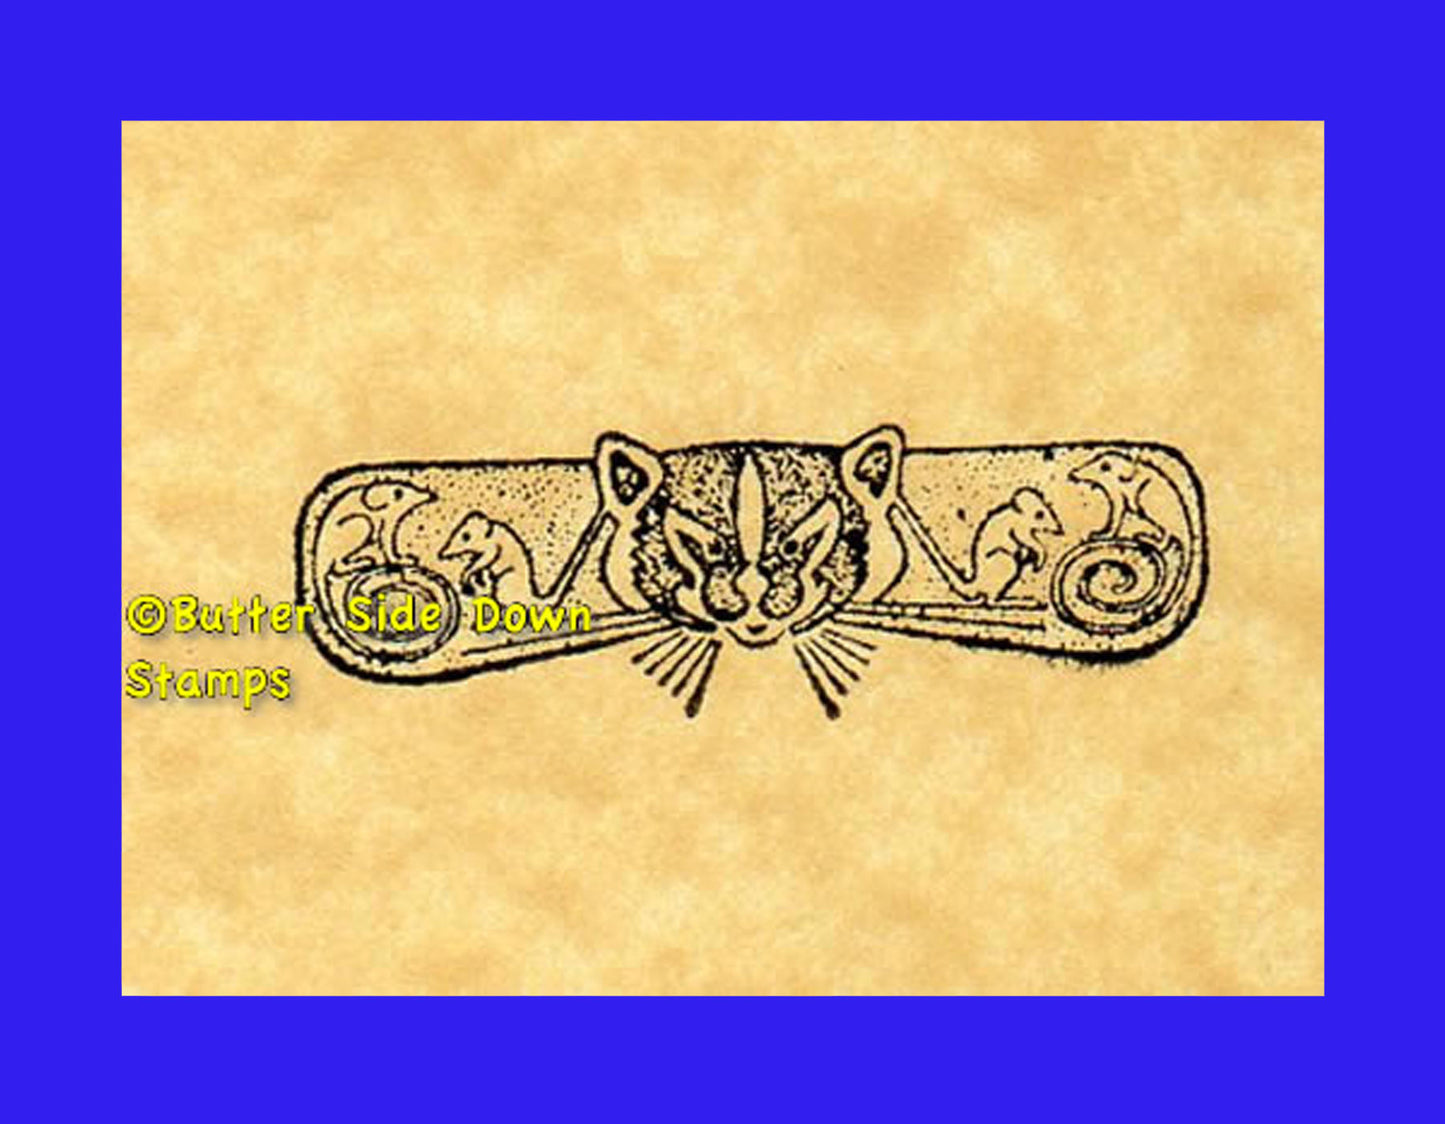 Badger with mice ornamentation rubber stamp